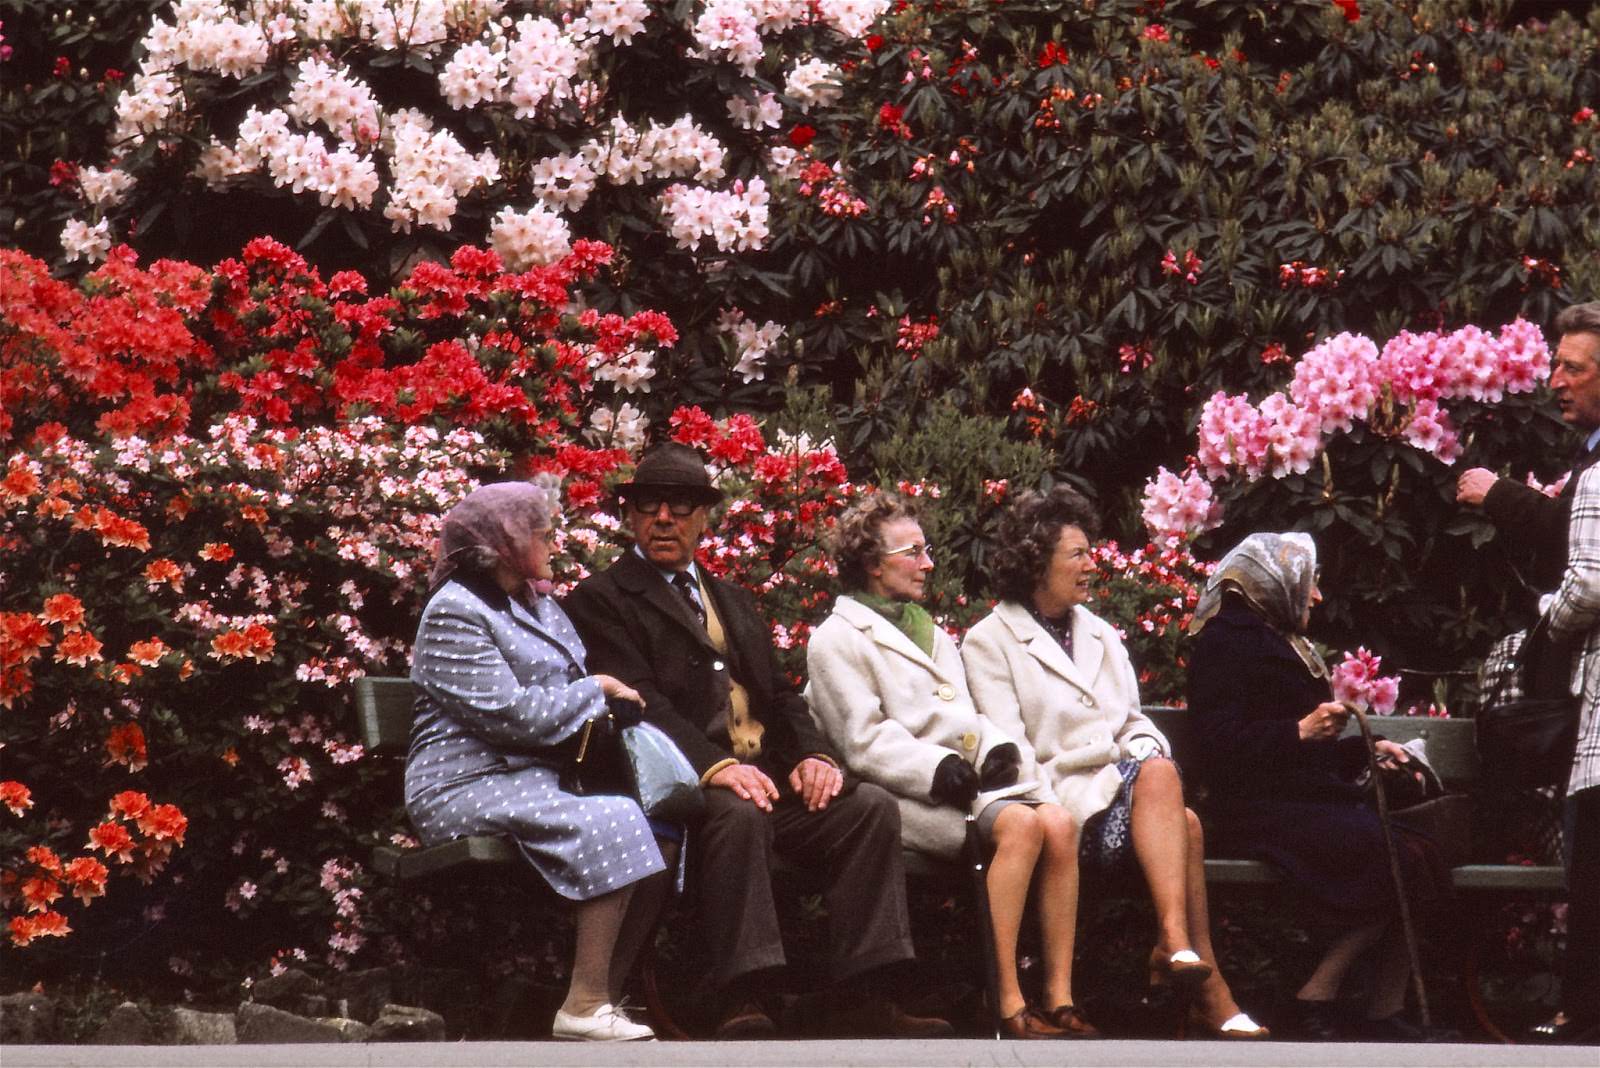 Temple Newsam. Whitsun 1975 - Rhododendron time.